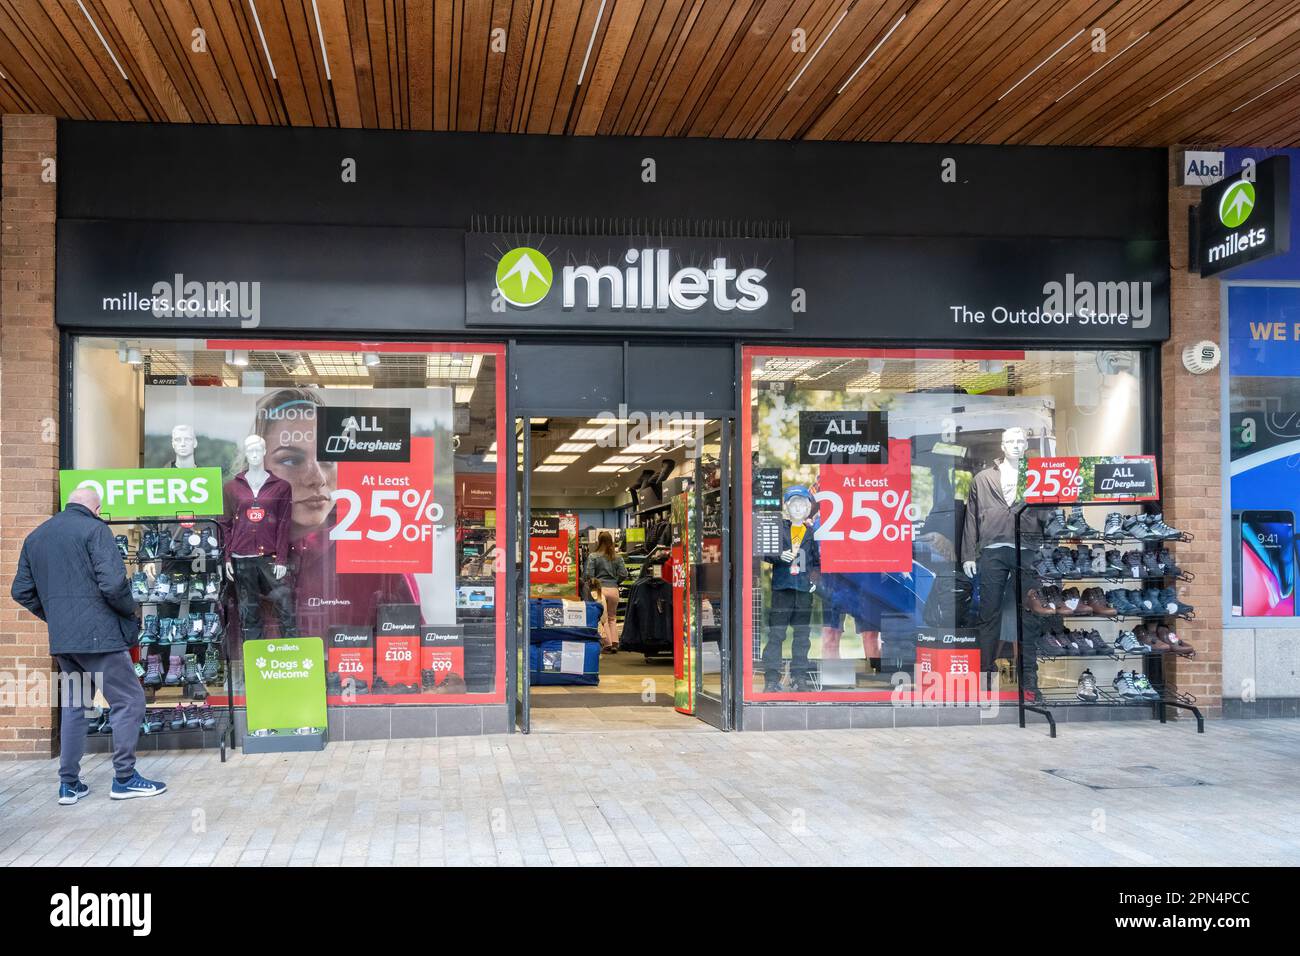 Man browsing in front of Millets shop, business selling outdoor clothing, Bracknell town centre, Berkshire, England, UK Stock Photo